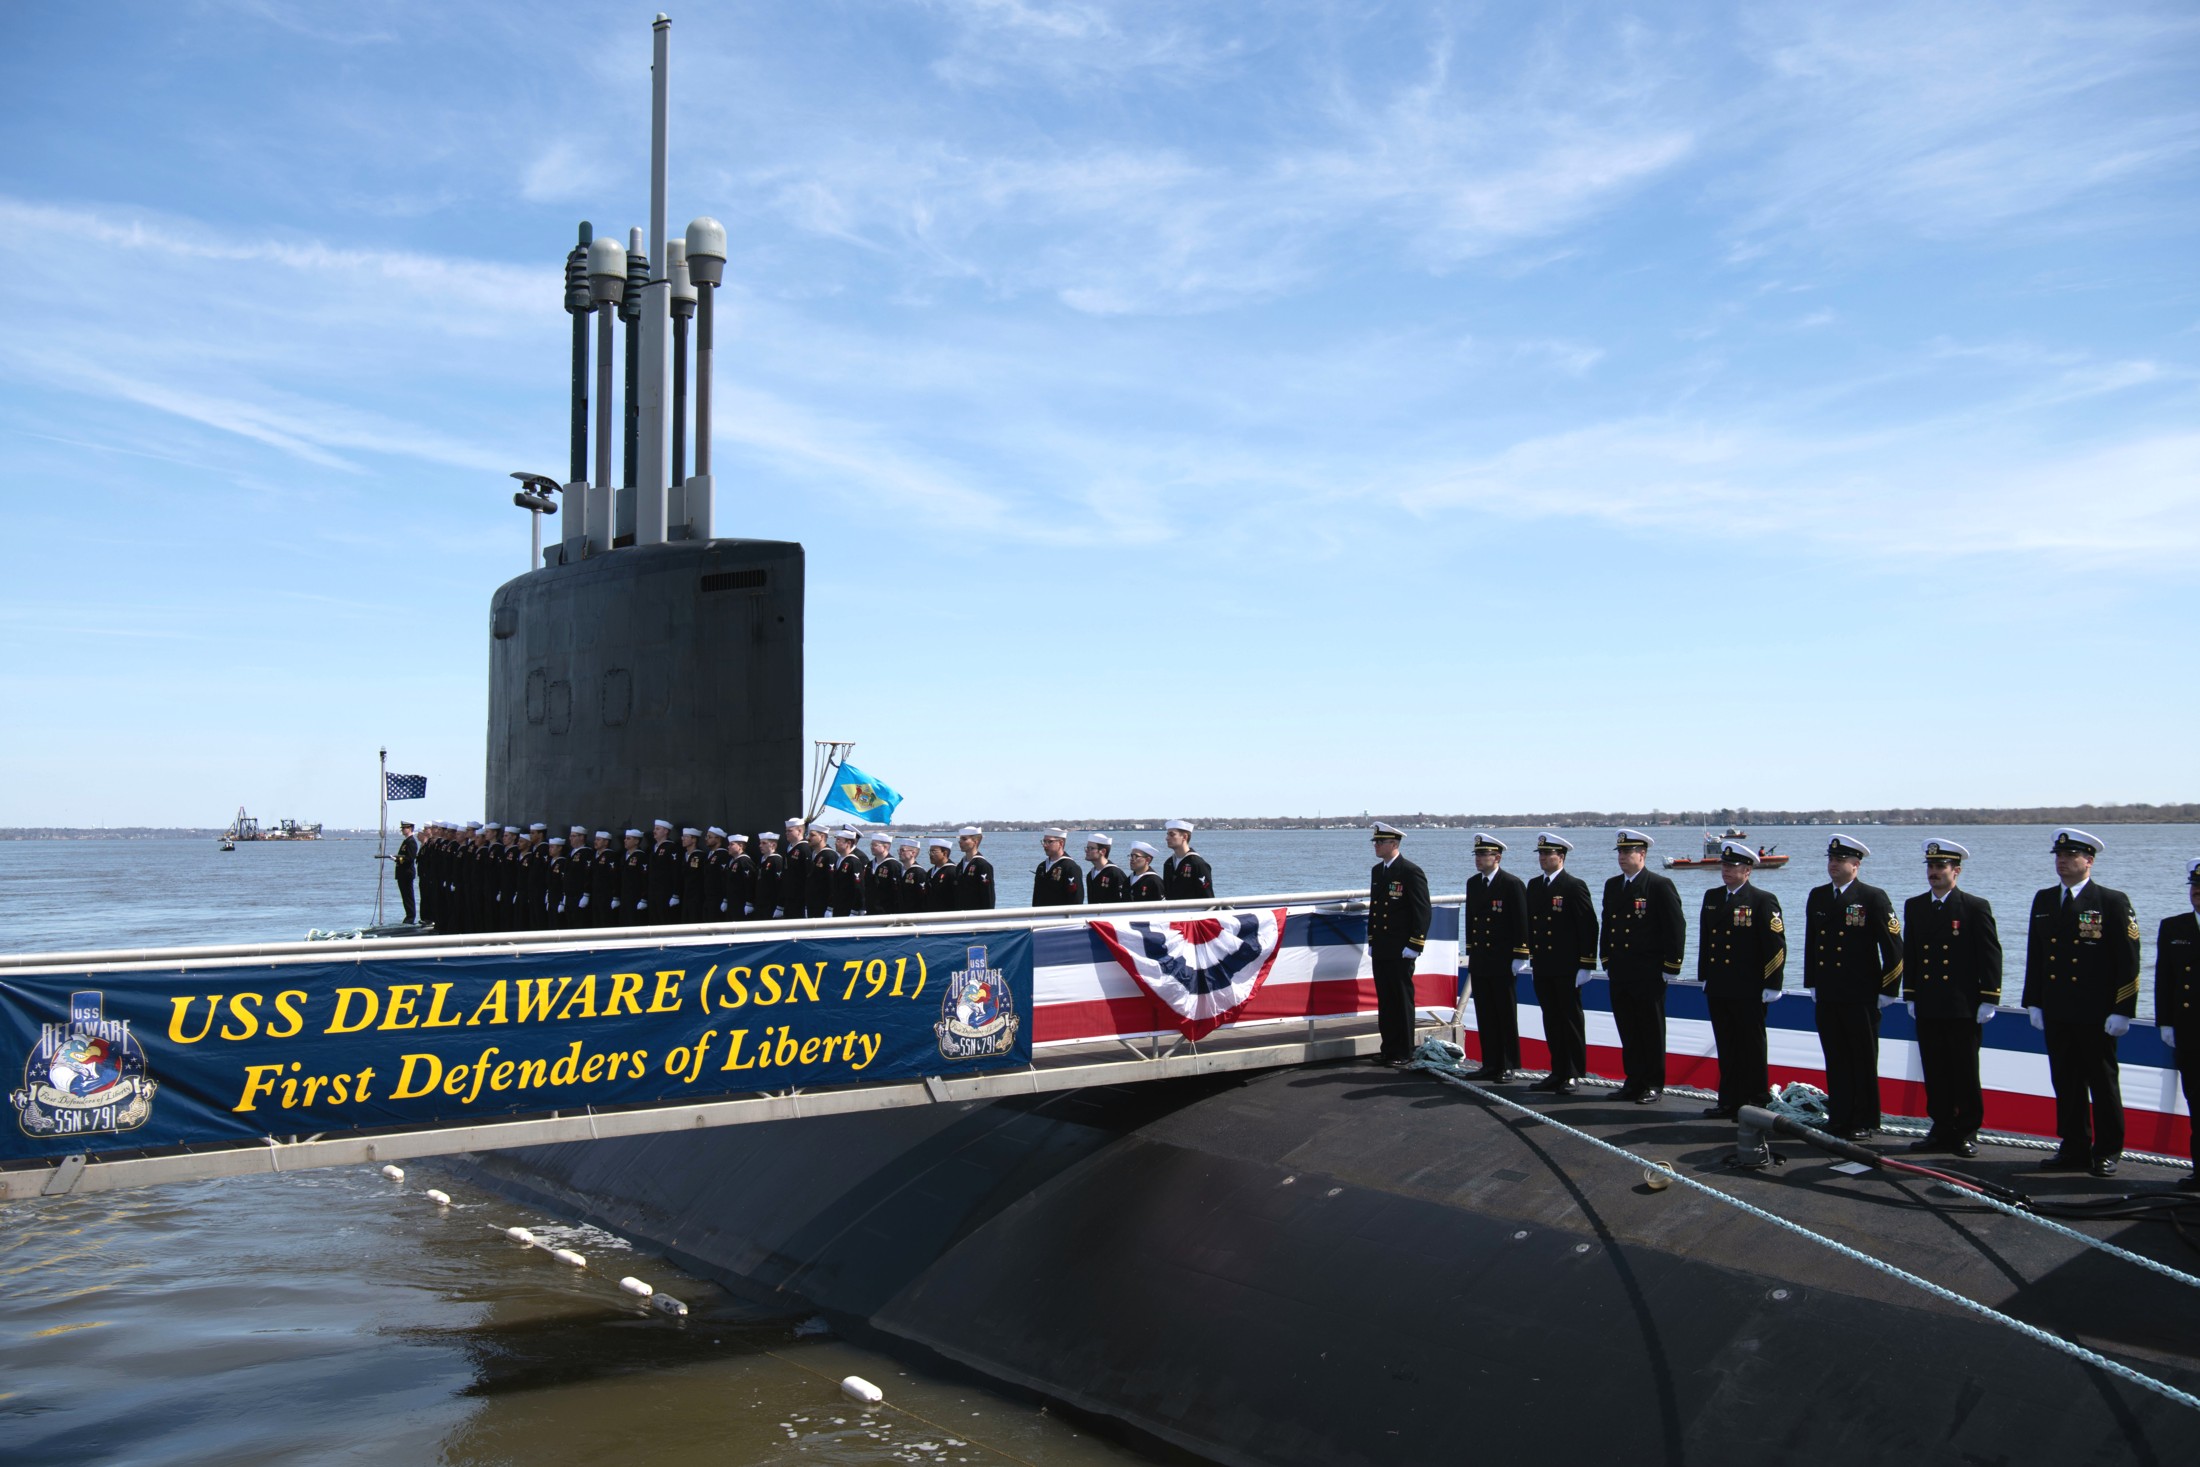 ssn-791 uss delaware virginia class attack submarine us navy commissioning wilmington 24